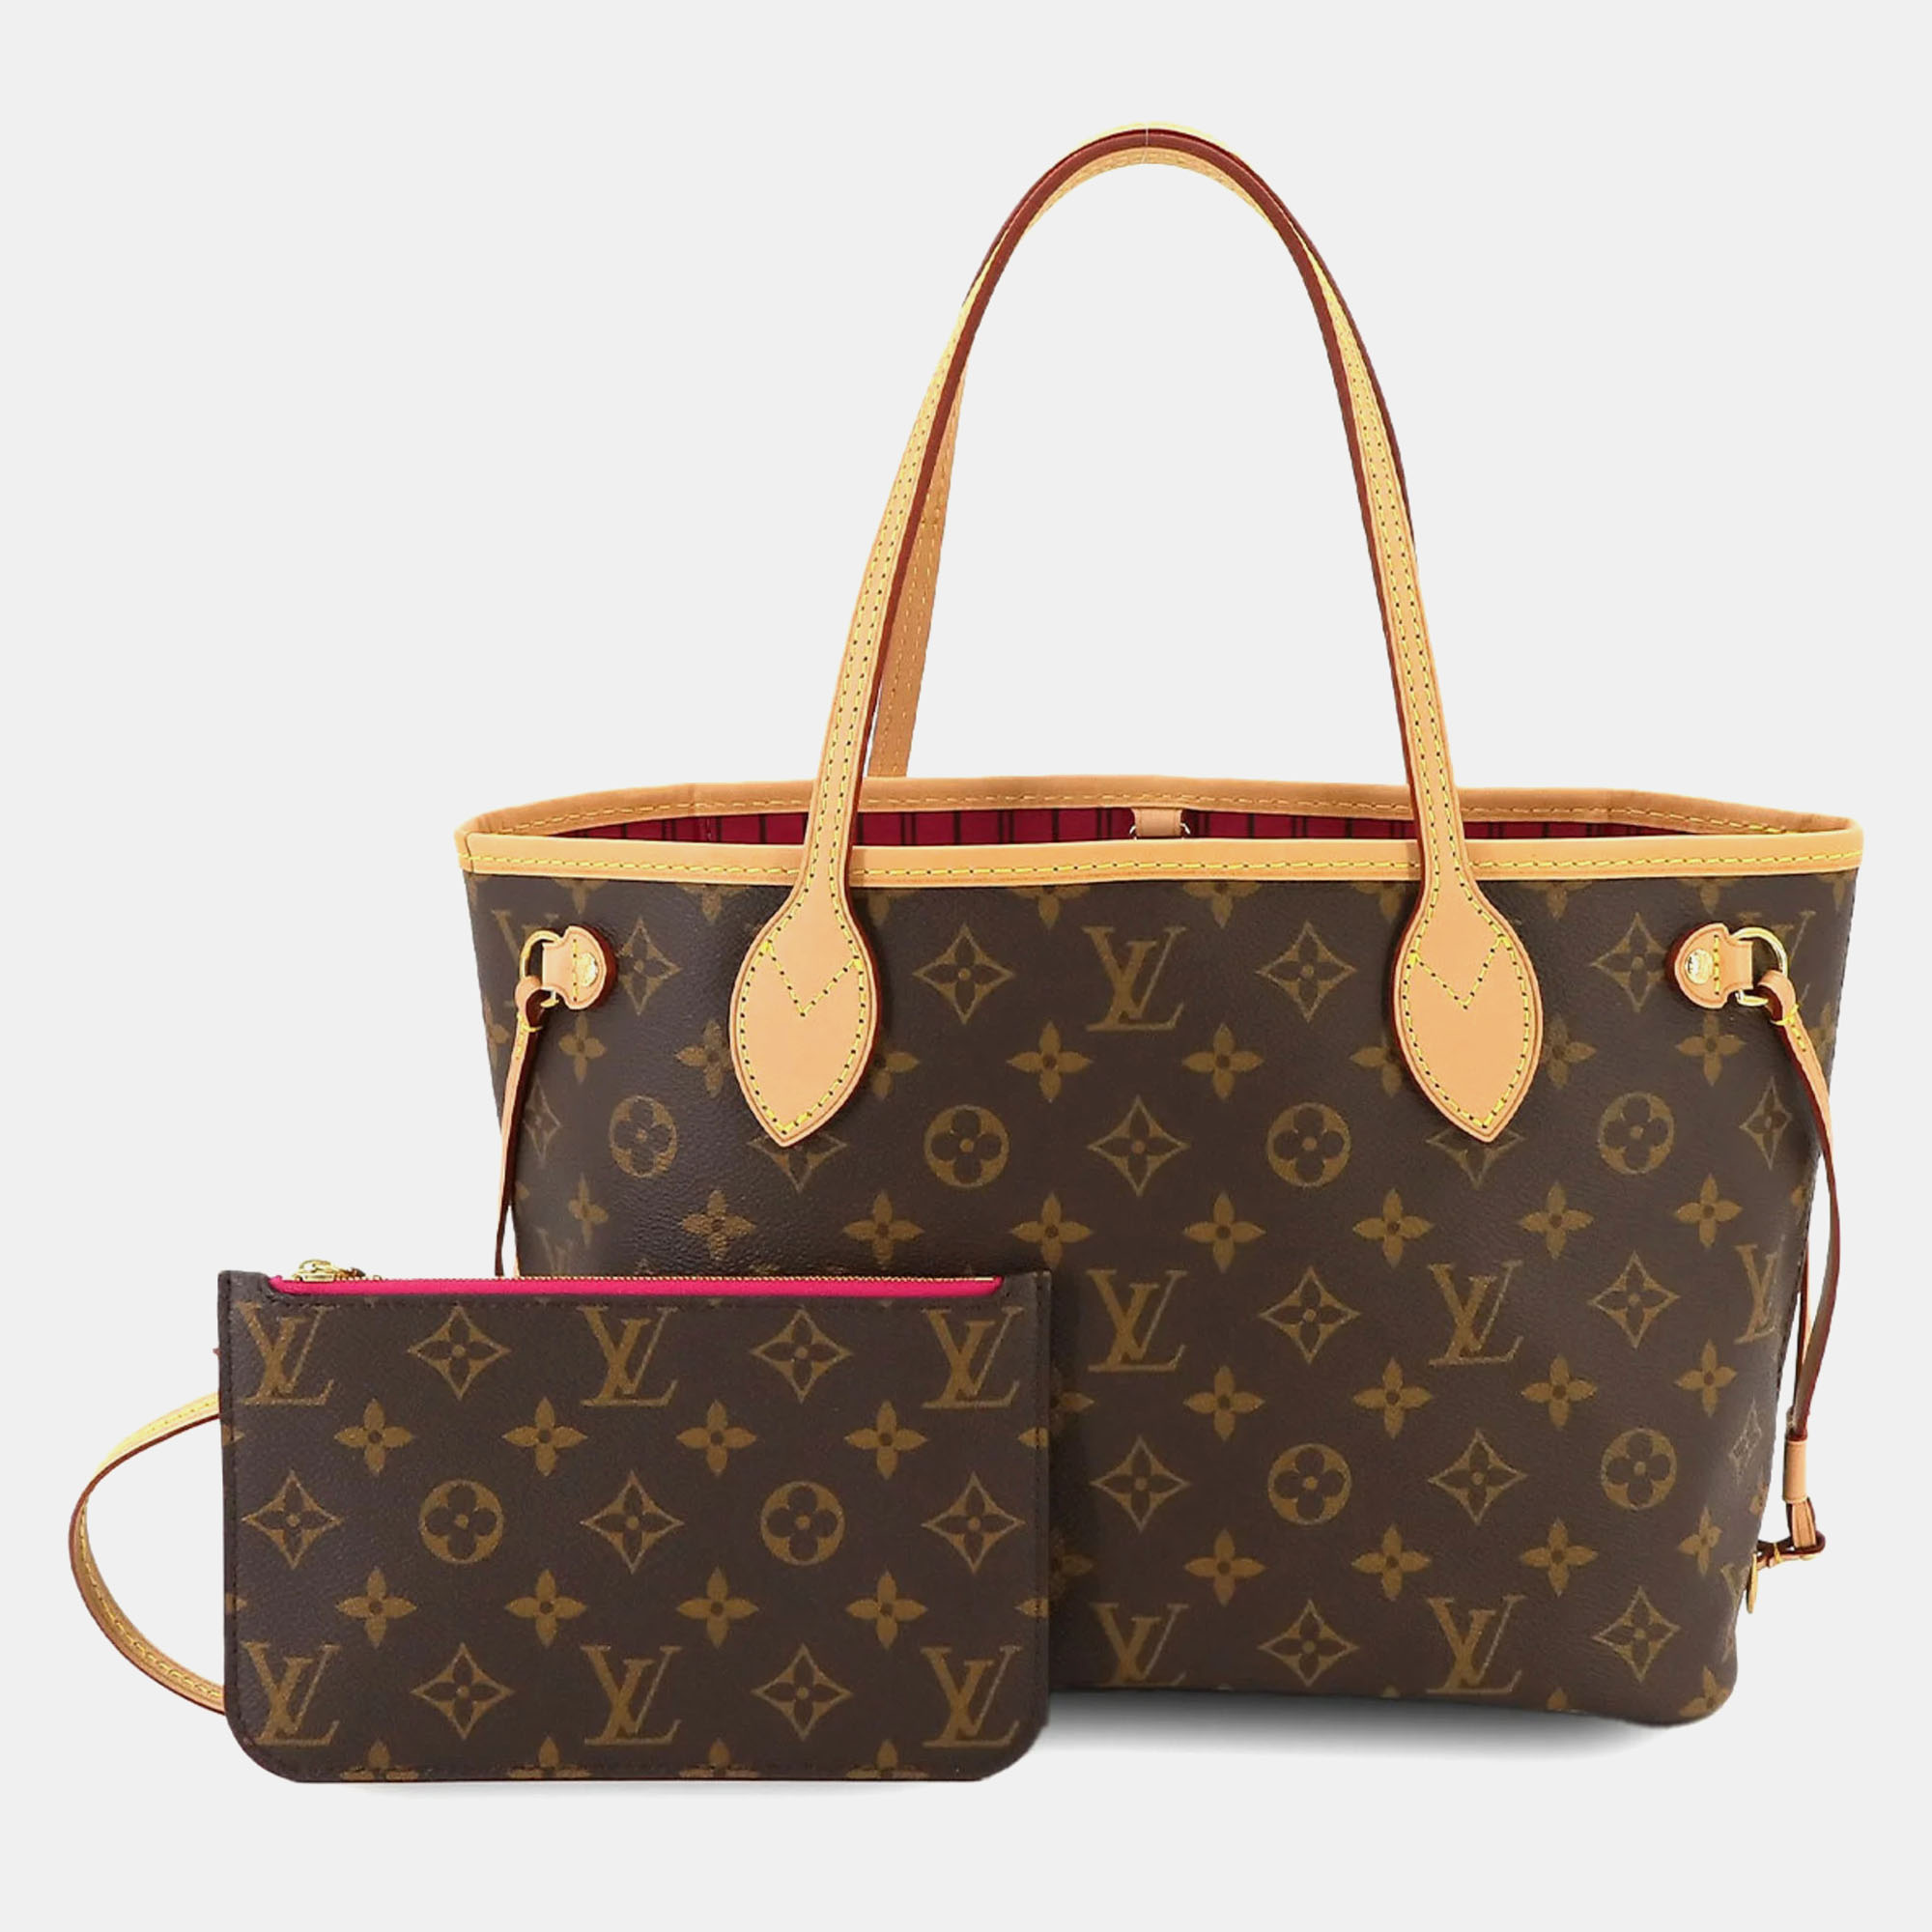 Louis vuitton brown coated canvas pm neverfull tote bag w/ pouch